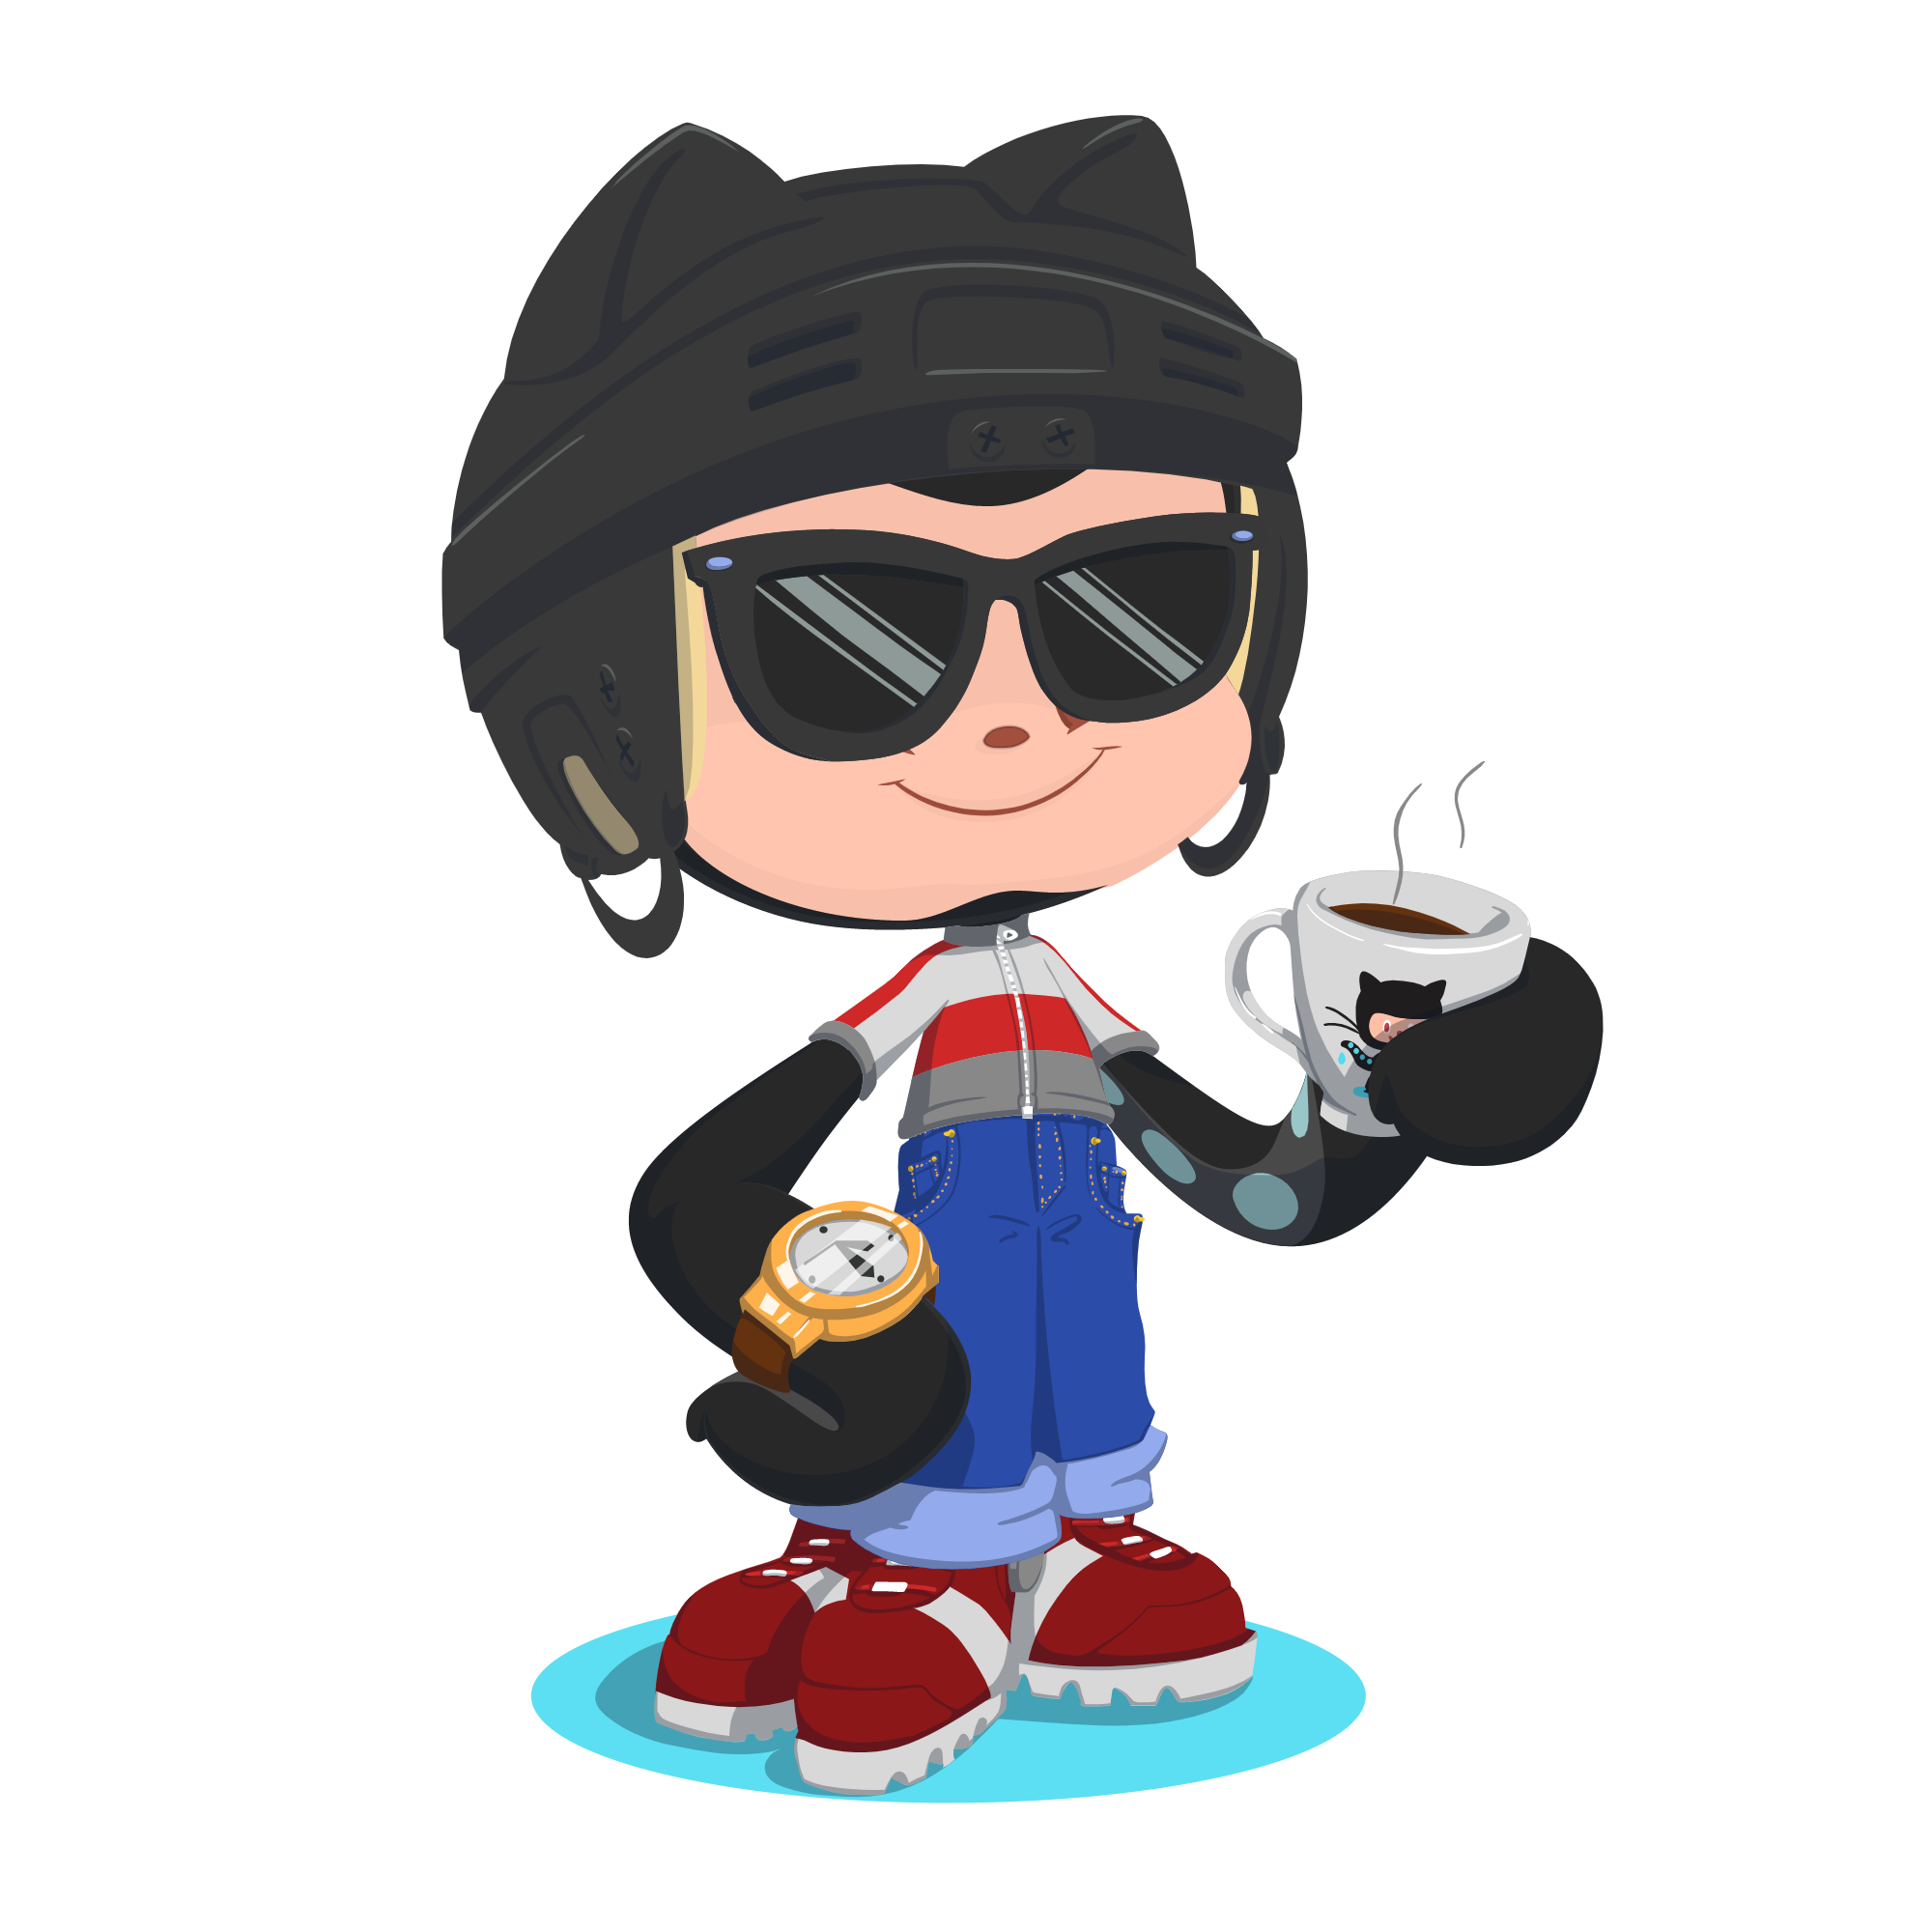 GitHub Octocat Drinking a Cup of Coffee